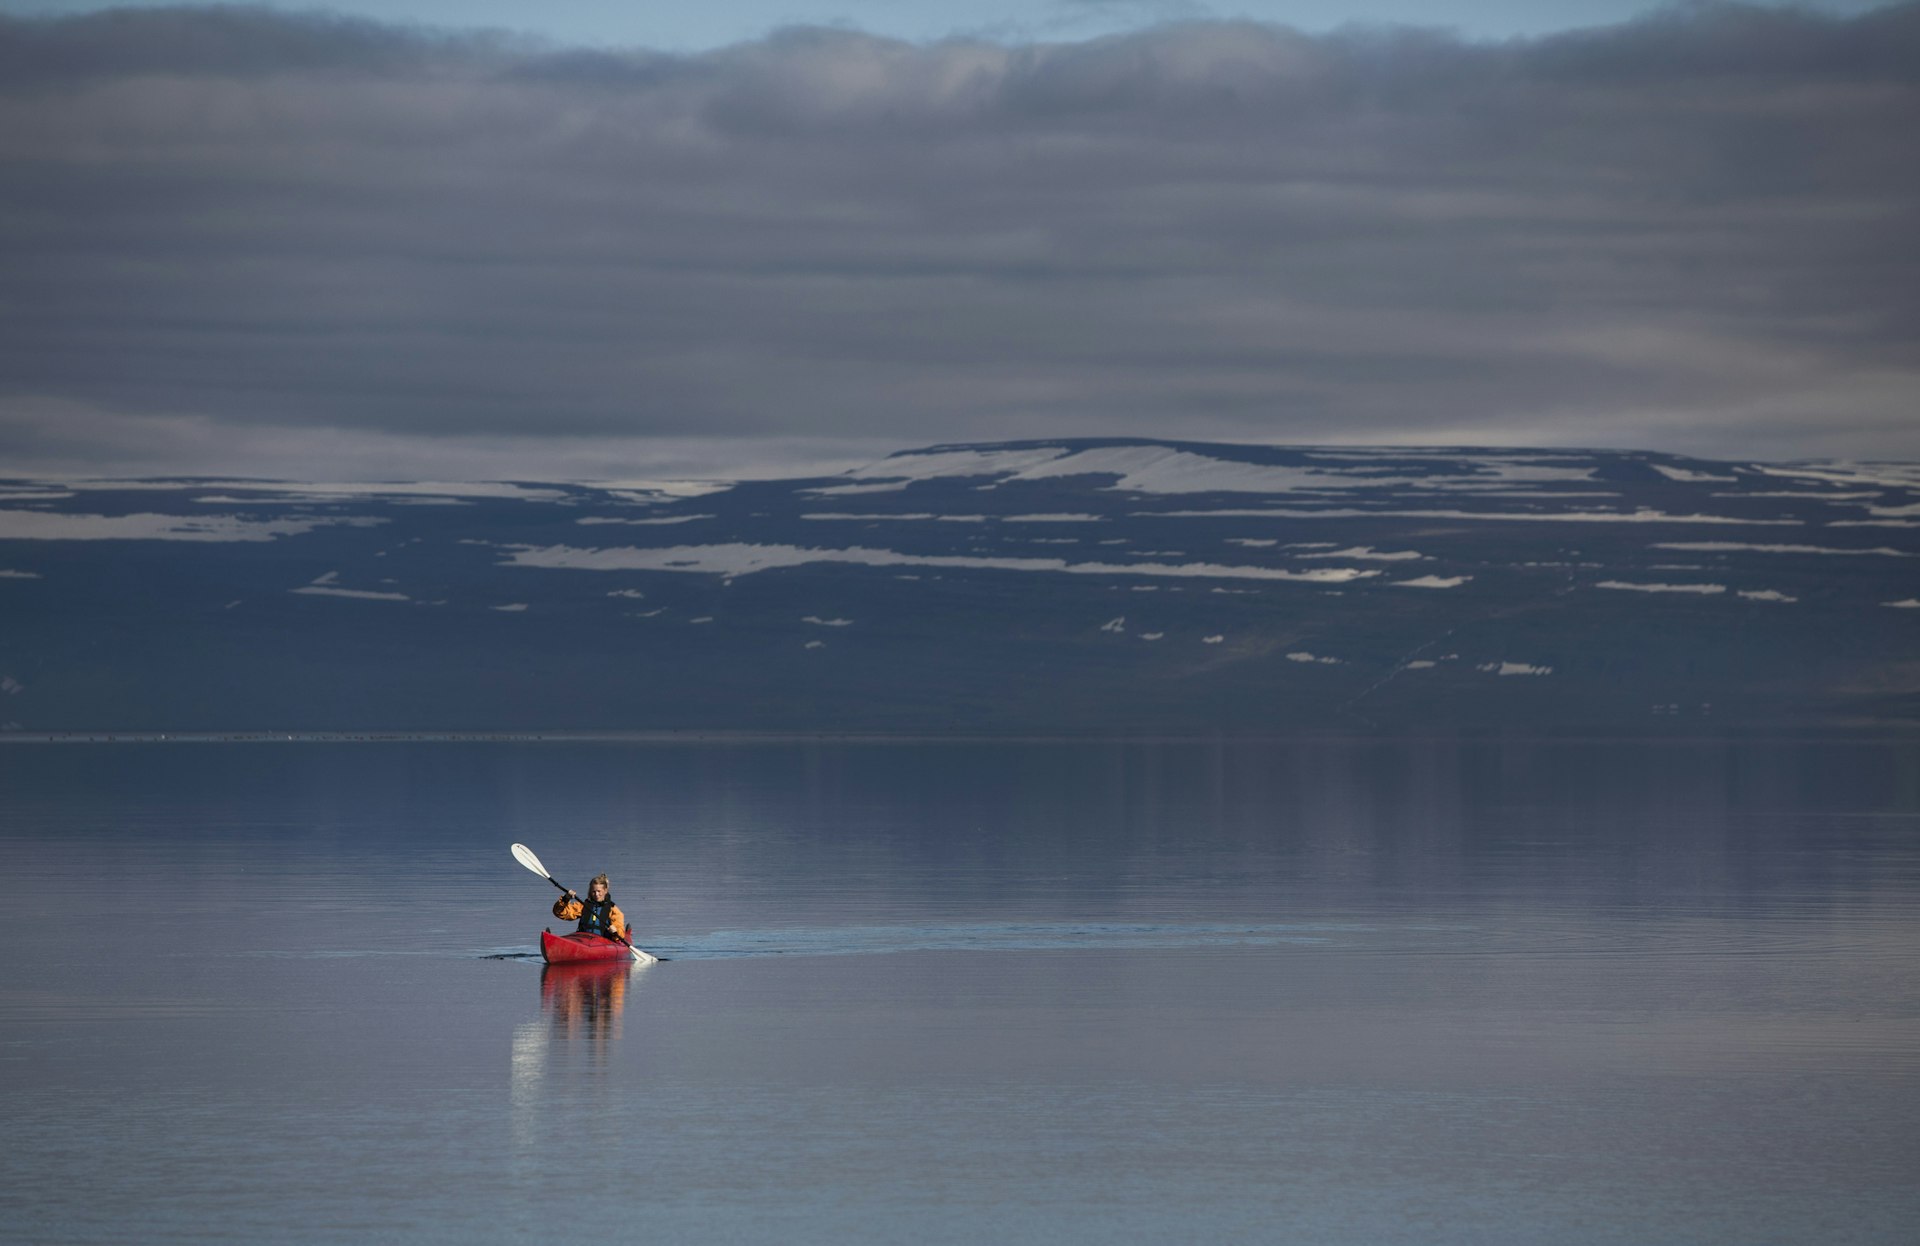 A woman in a red kayak paddles across a very still body of water with snow-capped hills in the distance